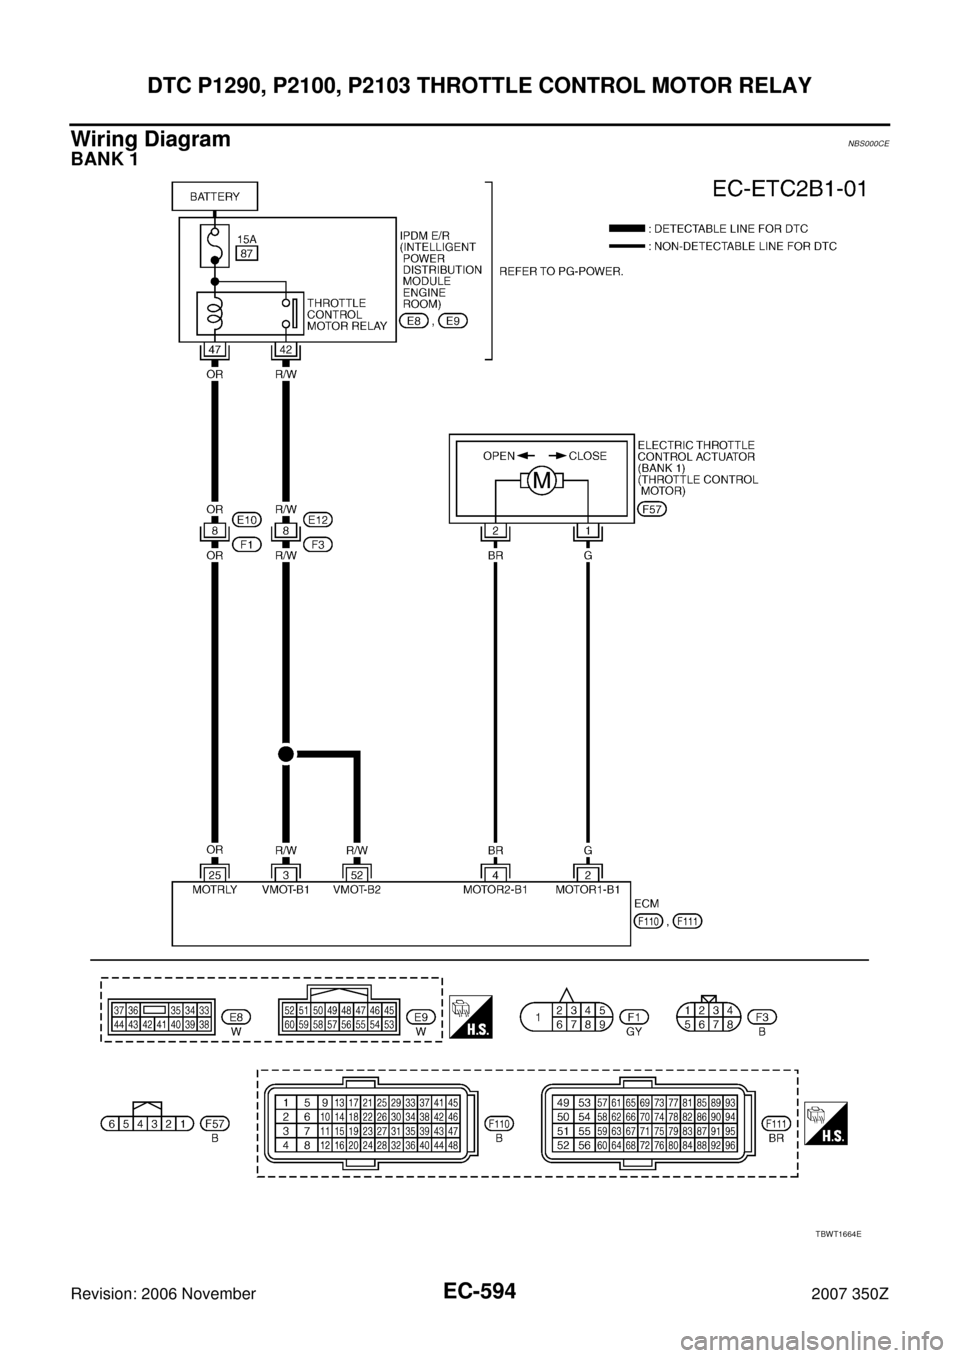 NISSAN 350Z 2007 Z33 Engine Control Workshop Manual EC-594
DTC P1290, P2100, P2103 THROTTLE CONTROL MOTOR RELAY
Revision: 2006 November2007 350Z
Wiring DiagramNBS000CE
BANK 1
TBWT1664E 